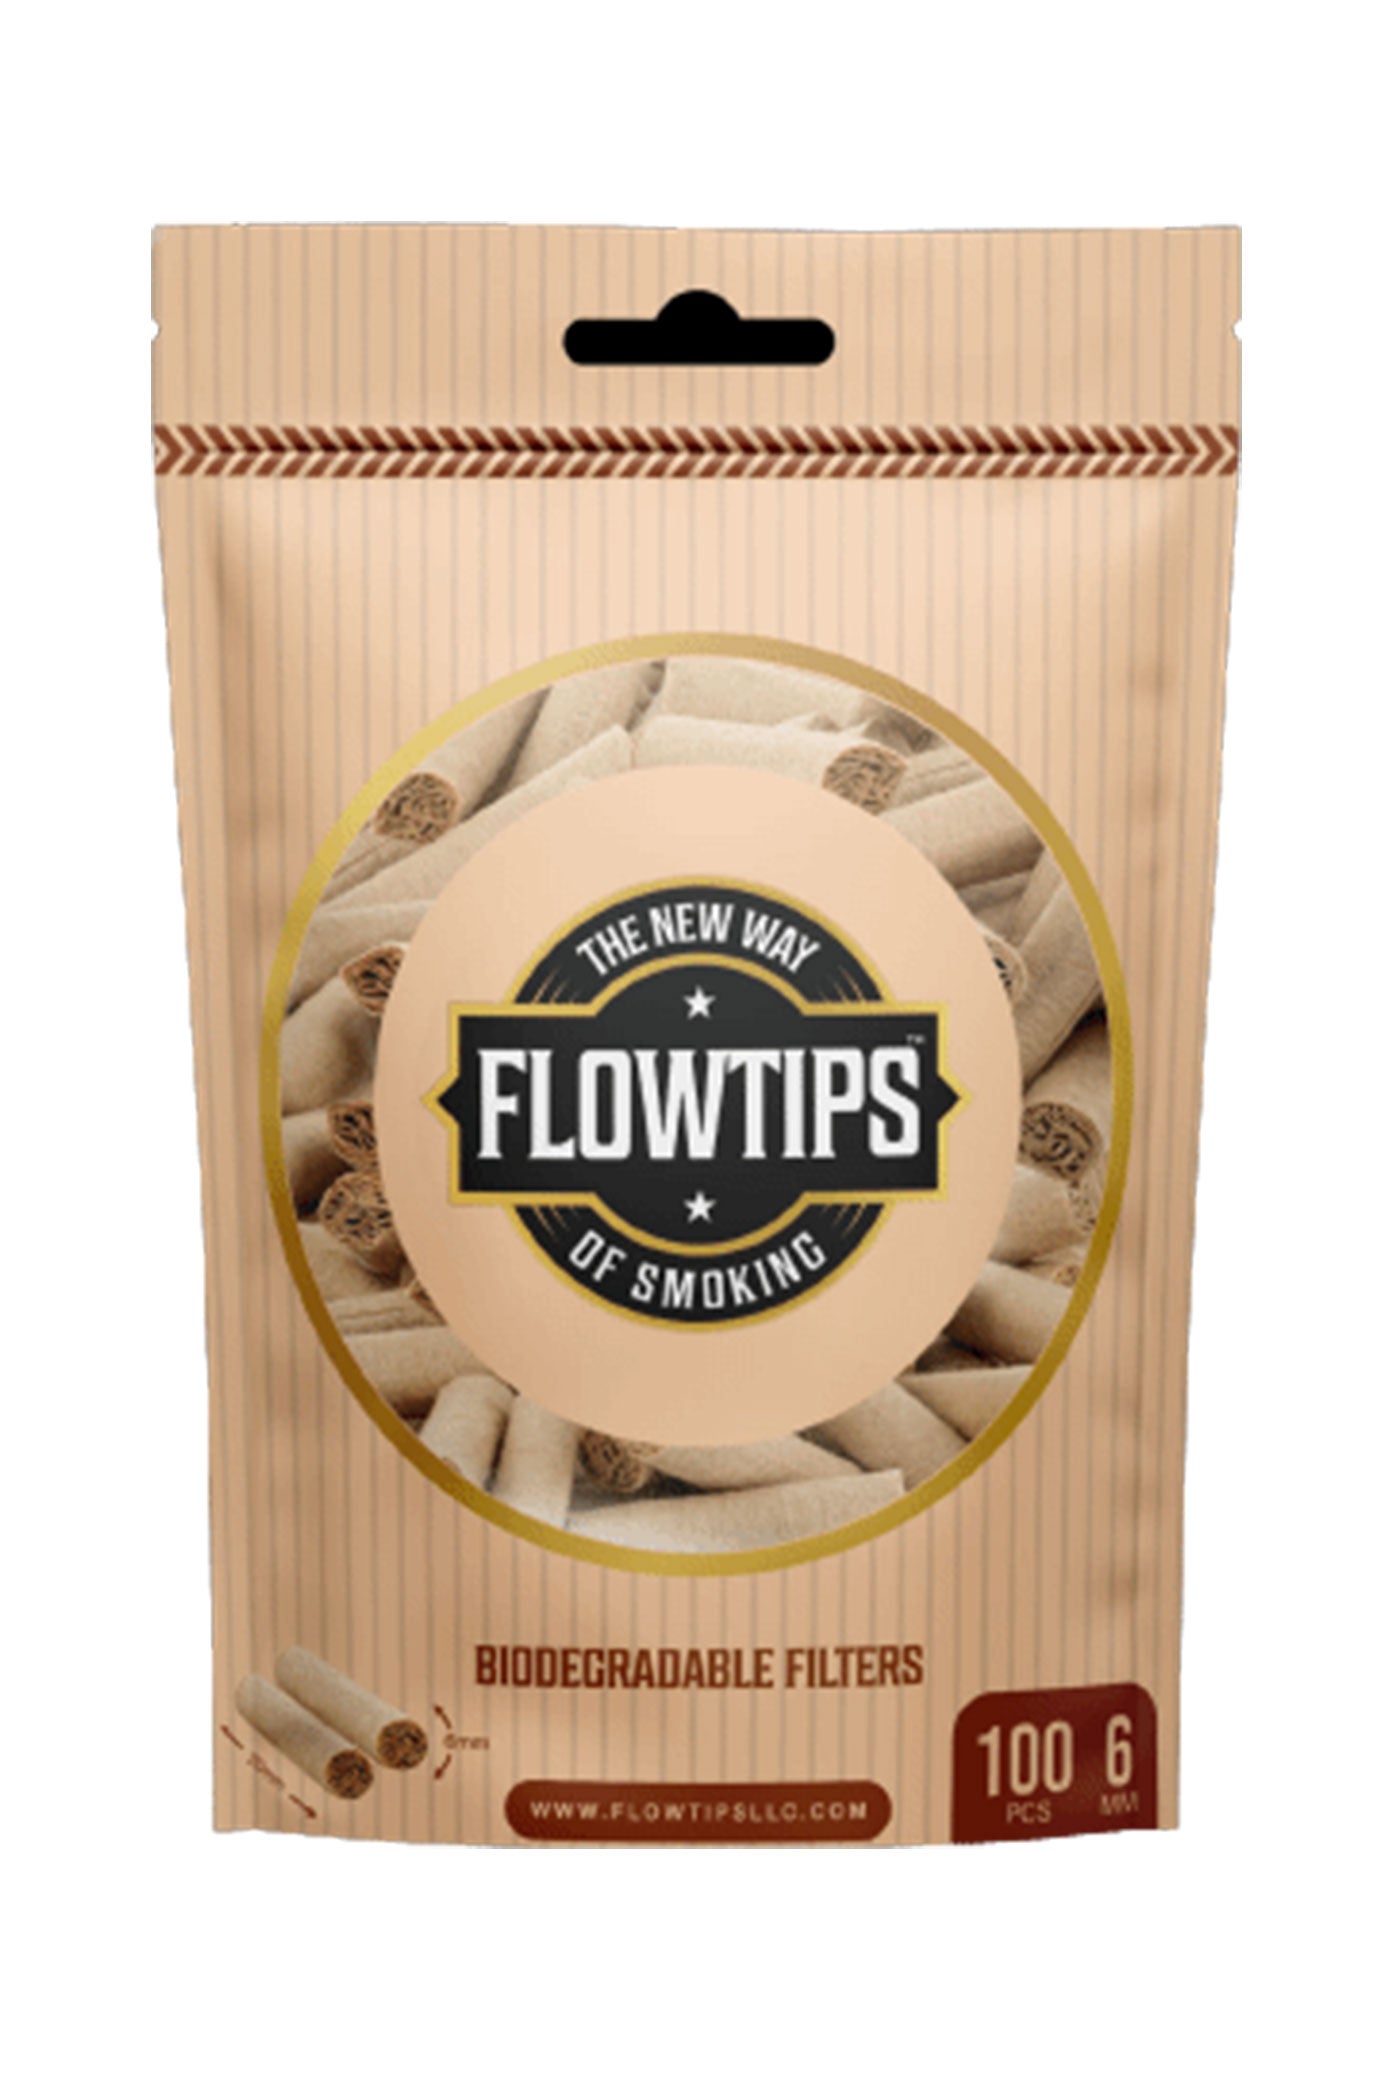 FLOWTIPS-BIODEGRADABLE FILTER Box of 10_1